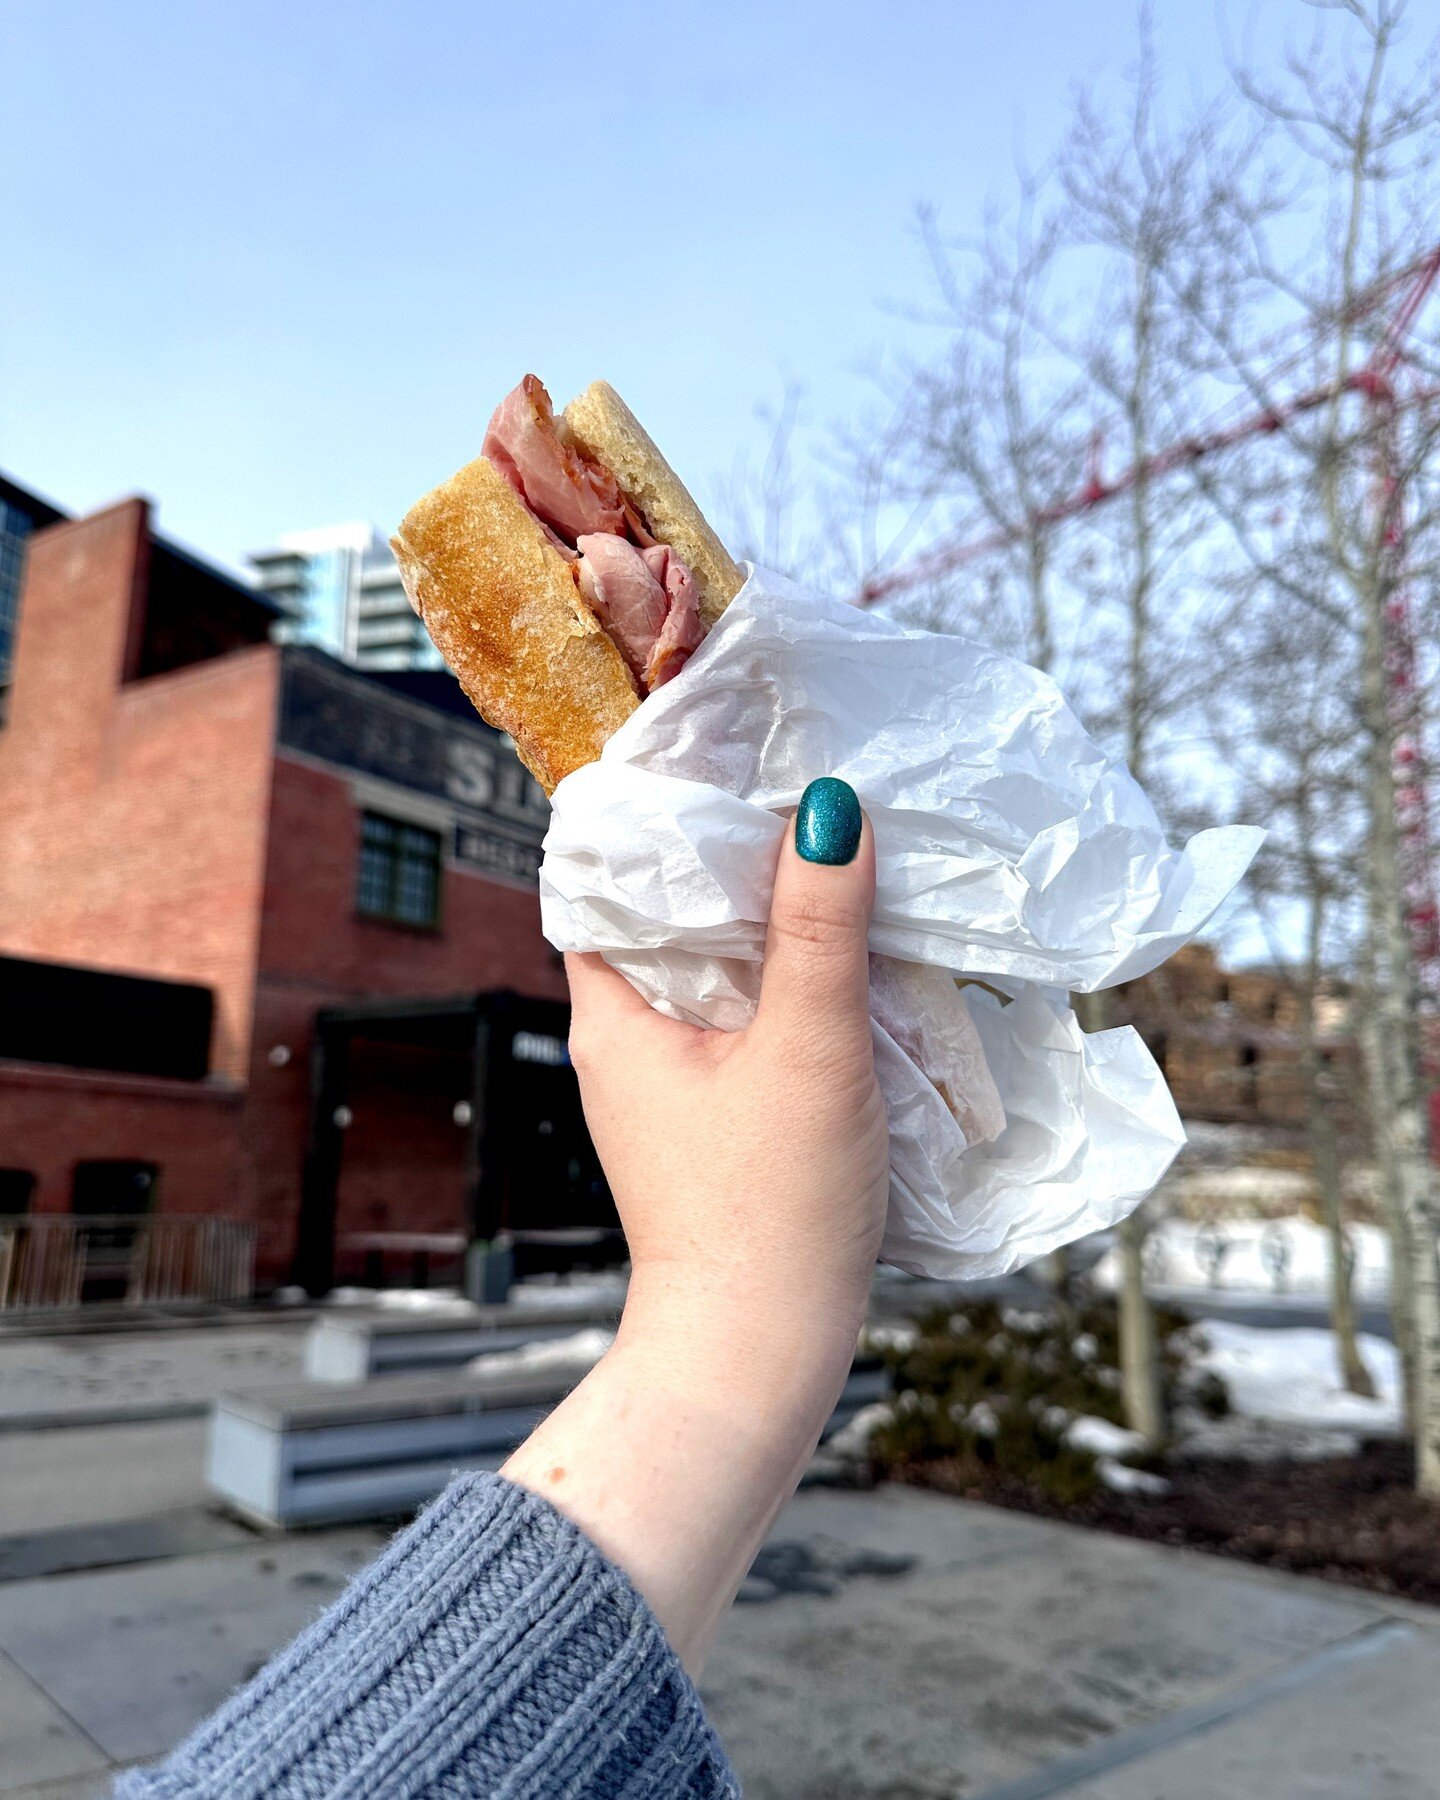 Have you tried our new Simple Sandwich? Baguette, ham, gruyere and mayo- $9.50 (almost) daily at the Simmons! Flavours will change periodically but will always remain simply delicious!
.
.
.
.
#yyc #yyceays #yycnow #yycbuzz #eastvillageyyc #evview #e